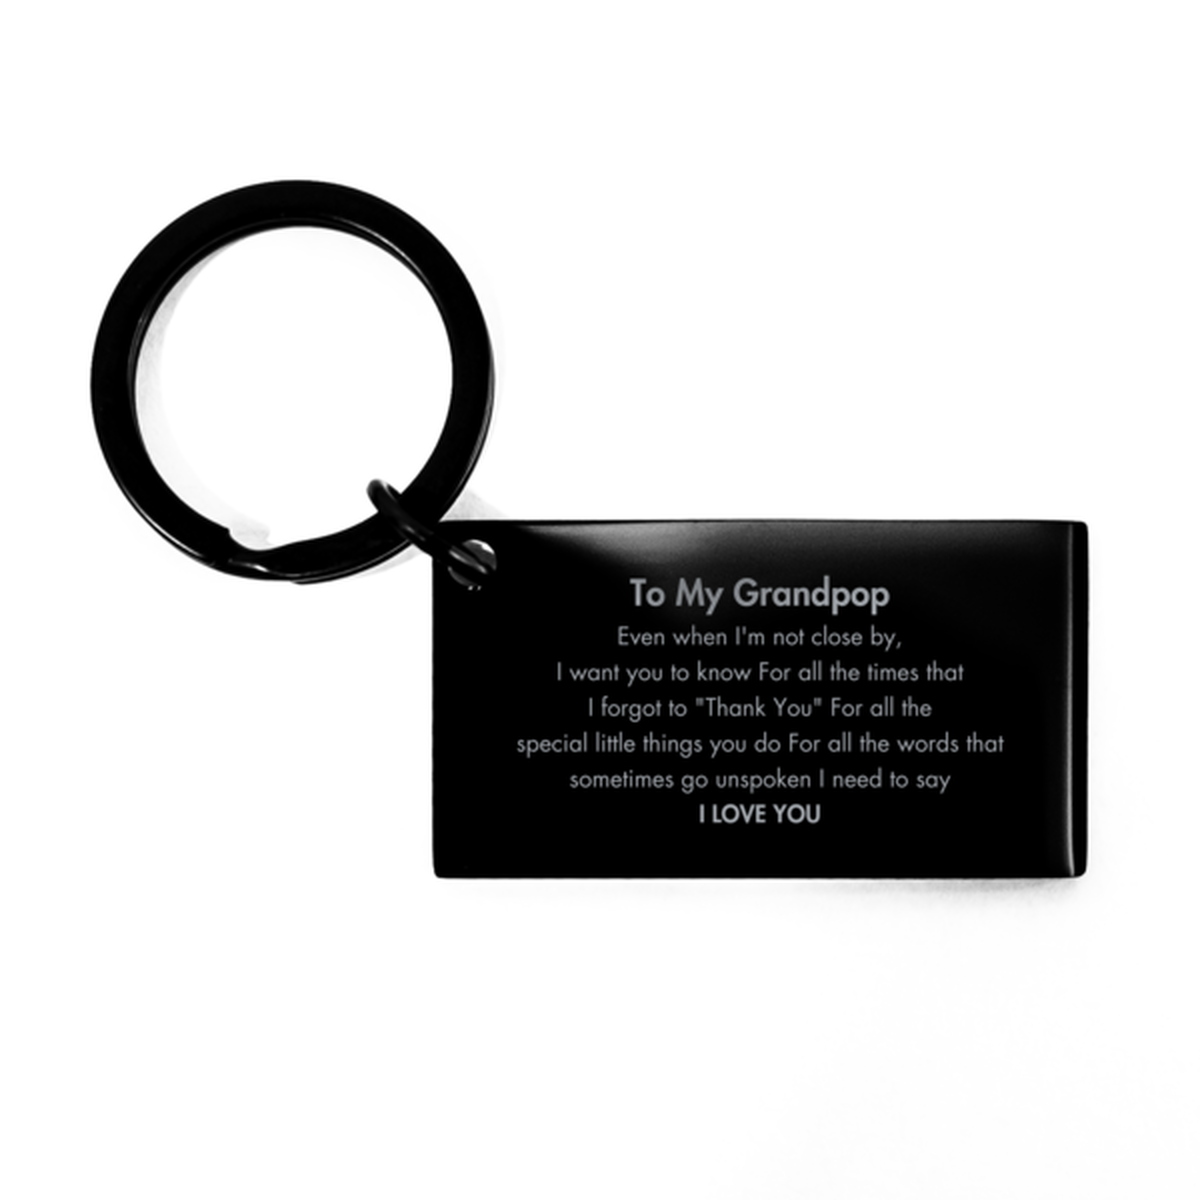 Thank You Gifts for Grandpop, Keepsake Keychain Gifts for Grandpop Birthday Mother's day Father's Day Grandpop For all the words That sometimes go unspoken I need to say I LOVE YOU